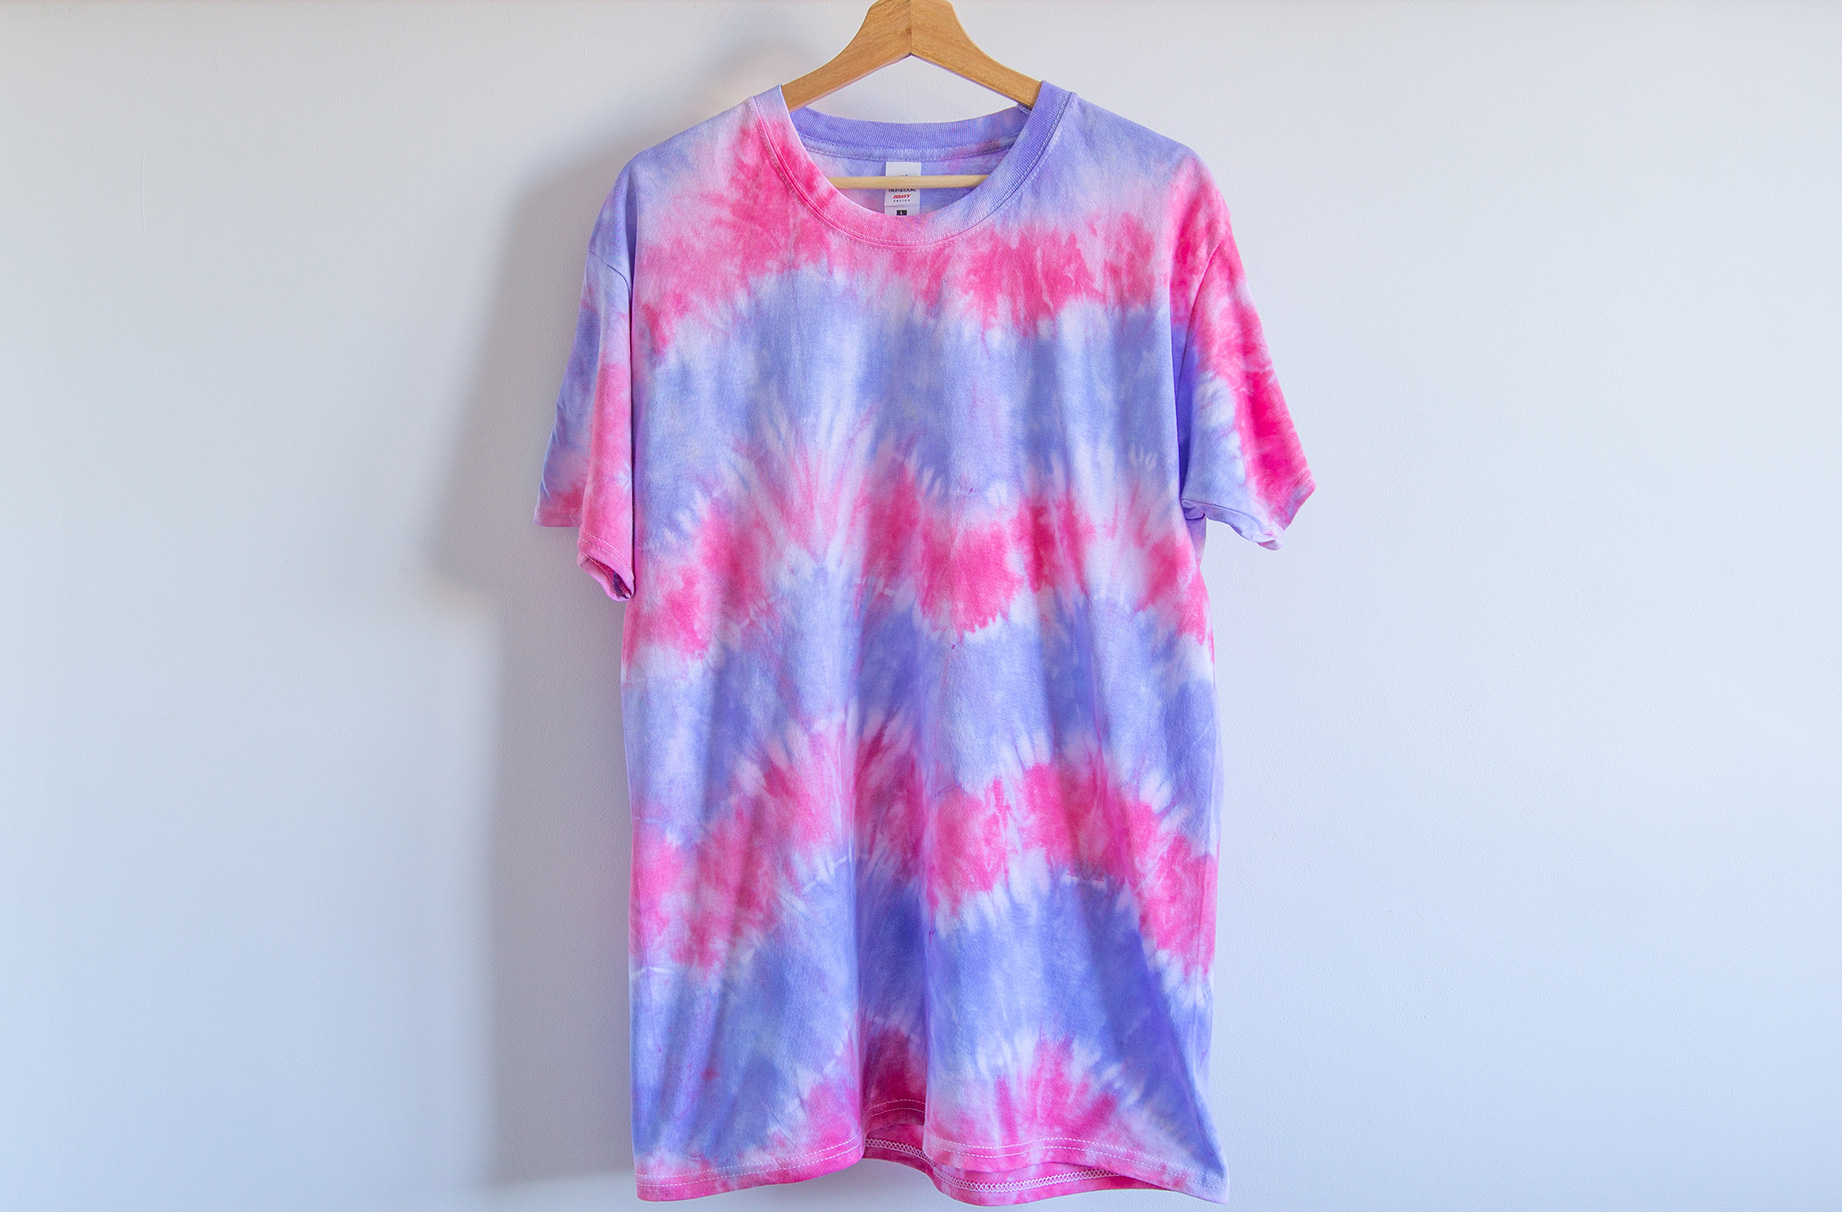 A t-shirt tie dyed with a chevron stripe